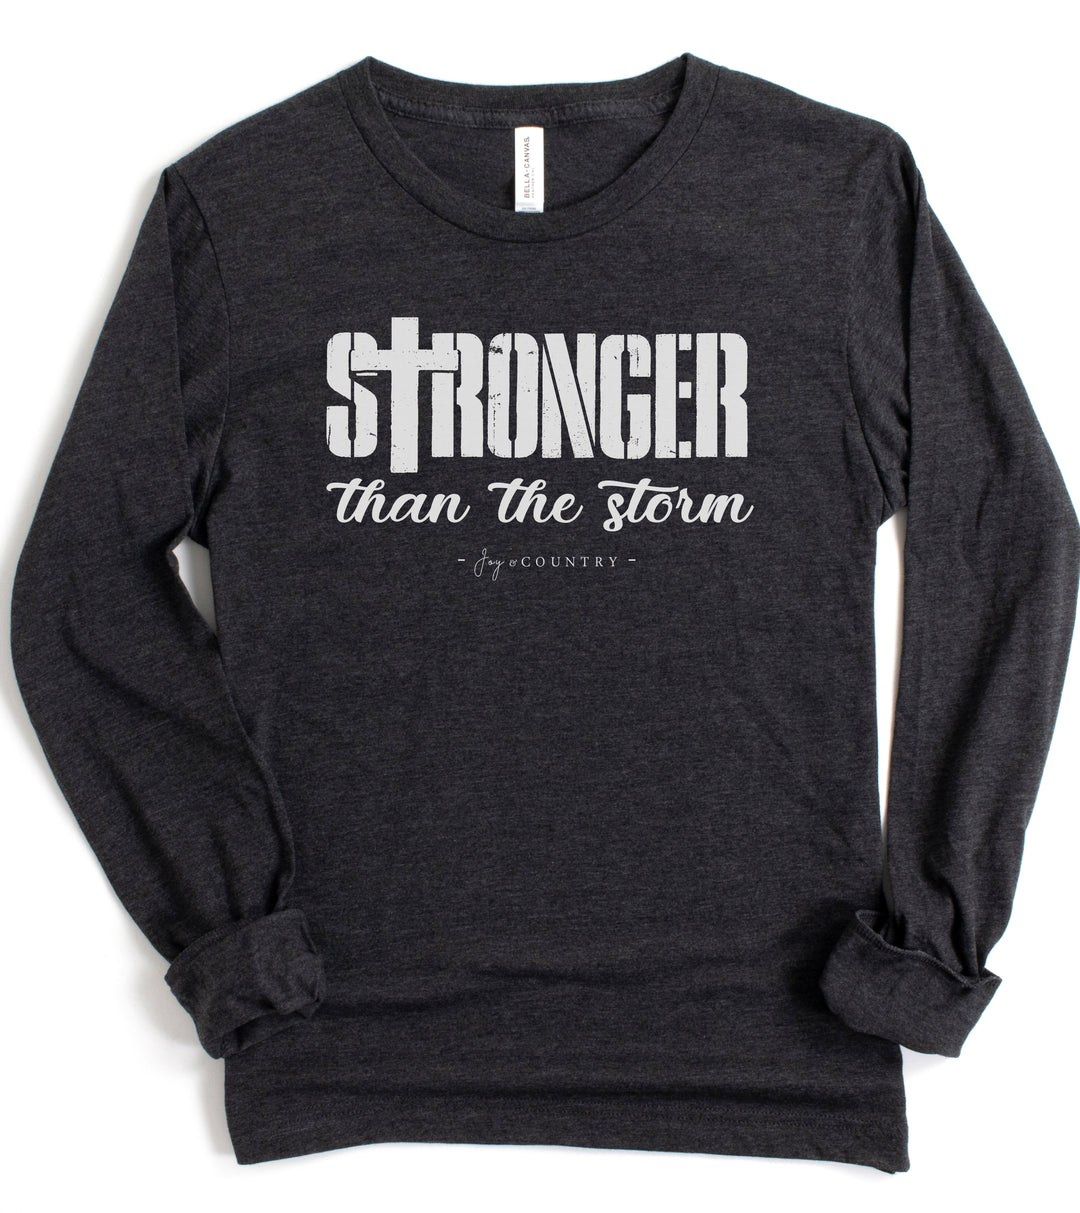 Stronger Than The Storm - Unisex Long-Sleeve Tee